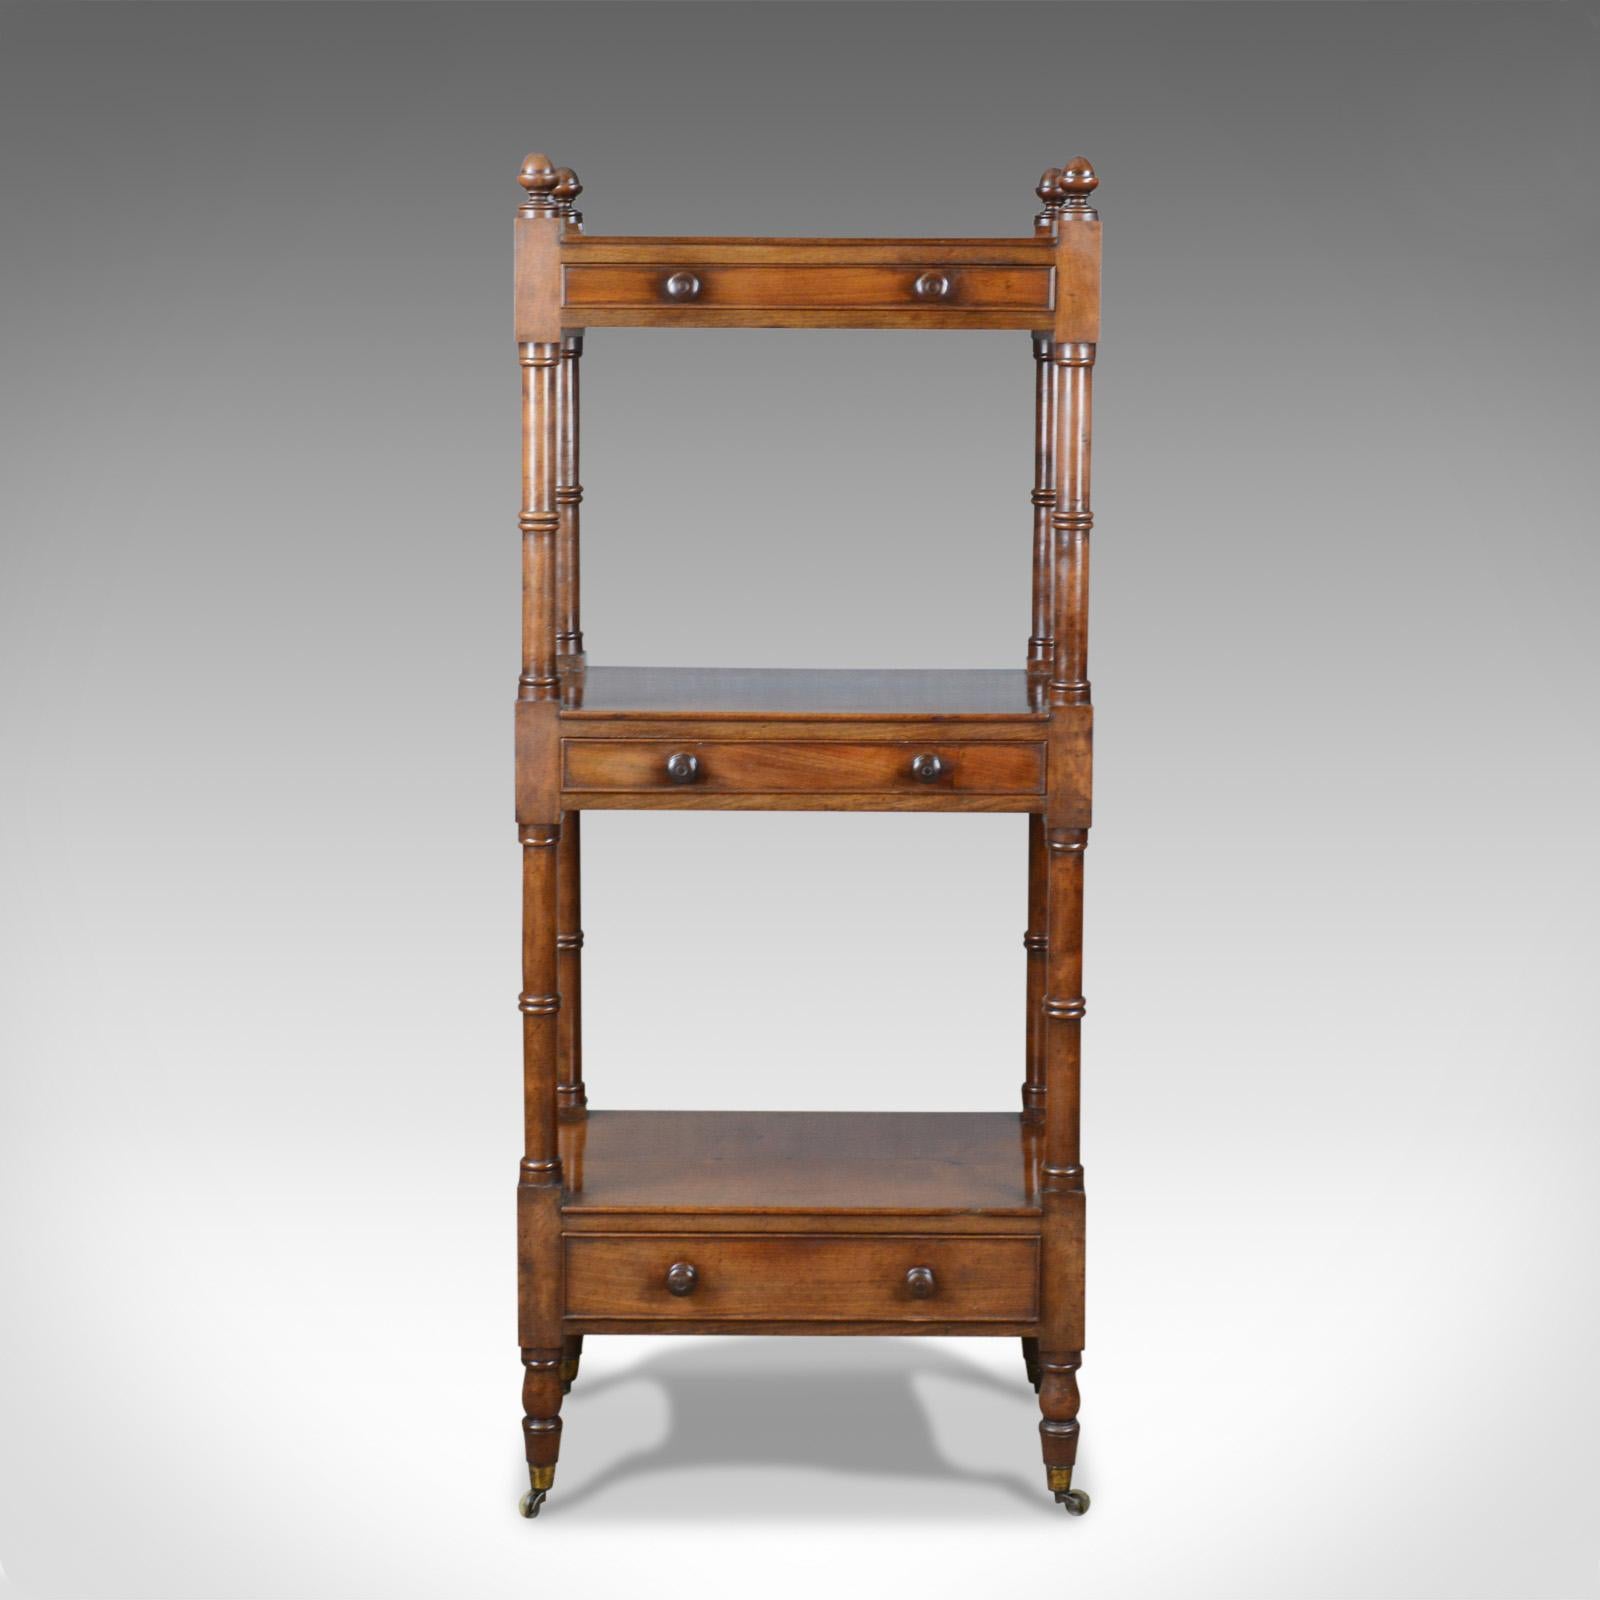 This is an antique whatnot, an English, mahogany, three-tier, Victorian display stand dating to the mid-19th century, circa 1860. 

Delightful, rich, russet tones to the select mahogany
Good consistent colour in the wax polished finish
Grain